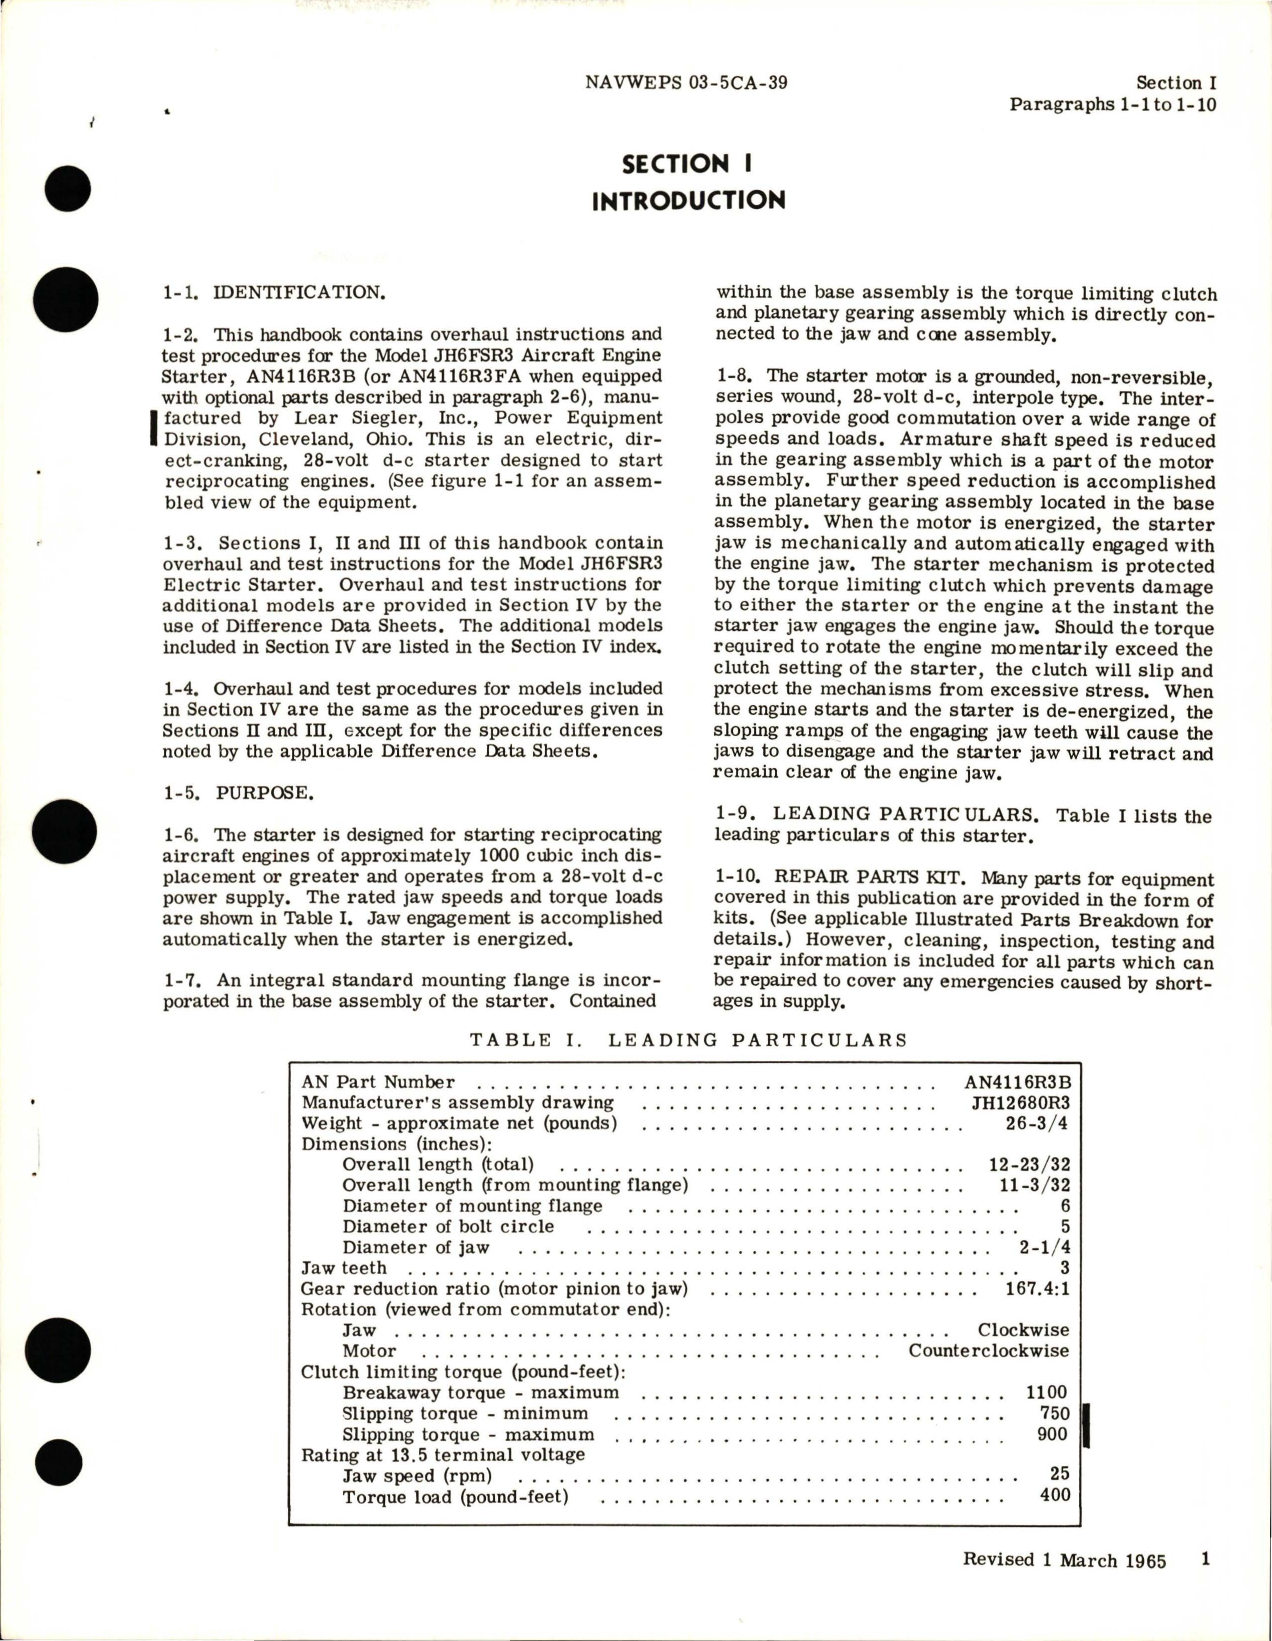 Sample page 5 from AirCorps Library document: Overhaul Instructions for Engine Starters